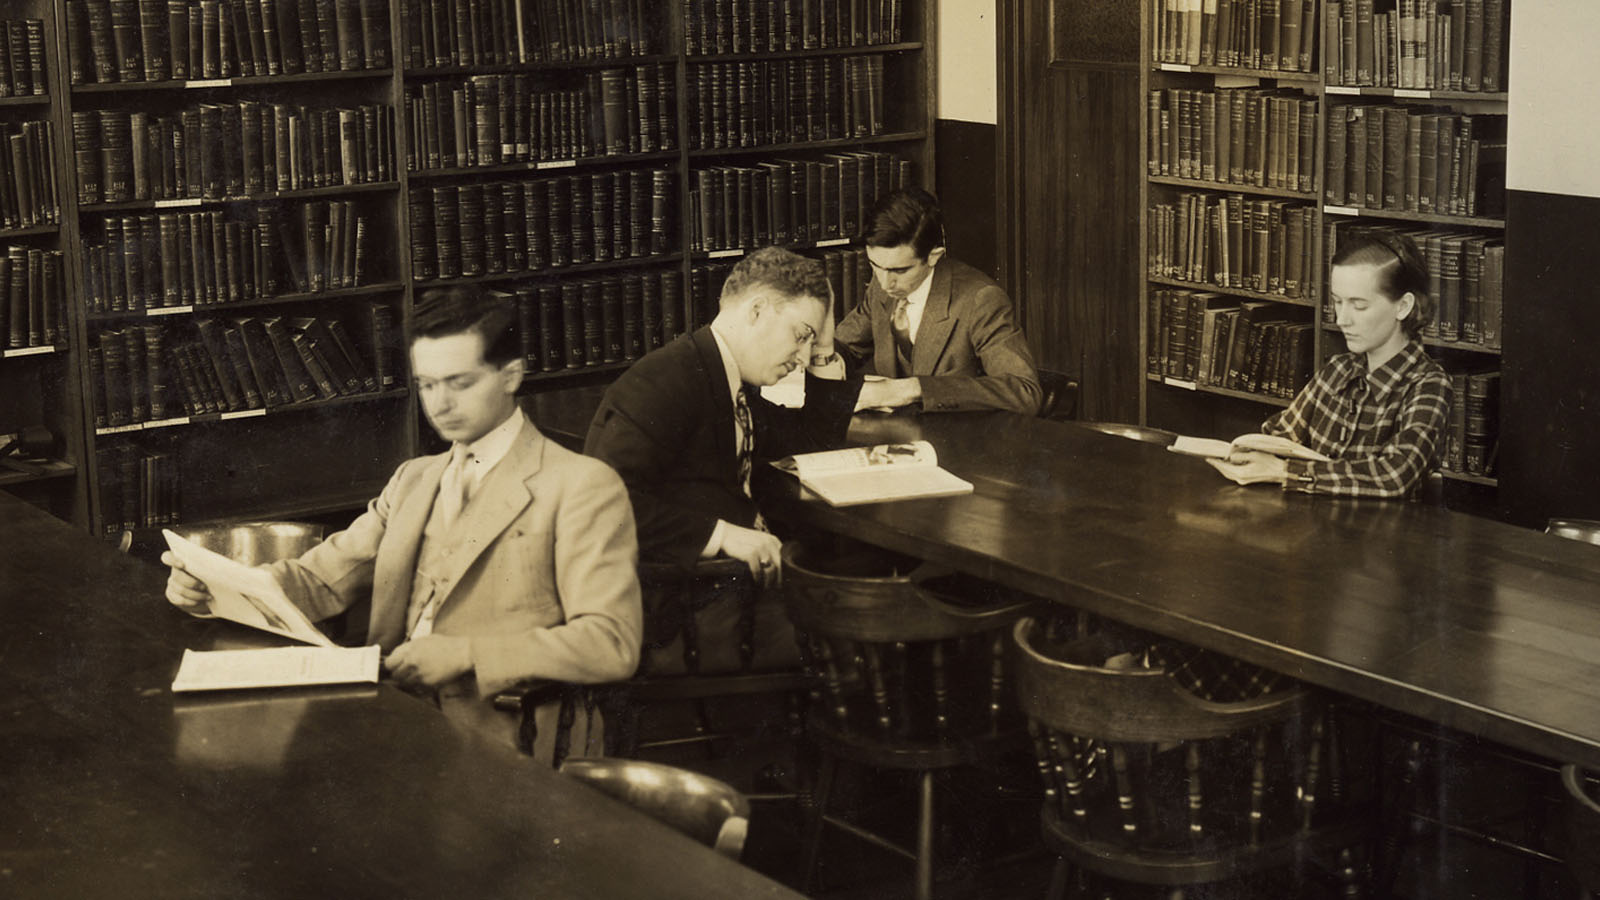 A few students studying in an old PCOM medical library